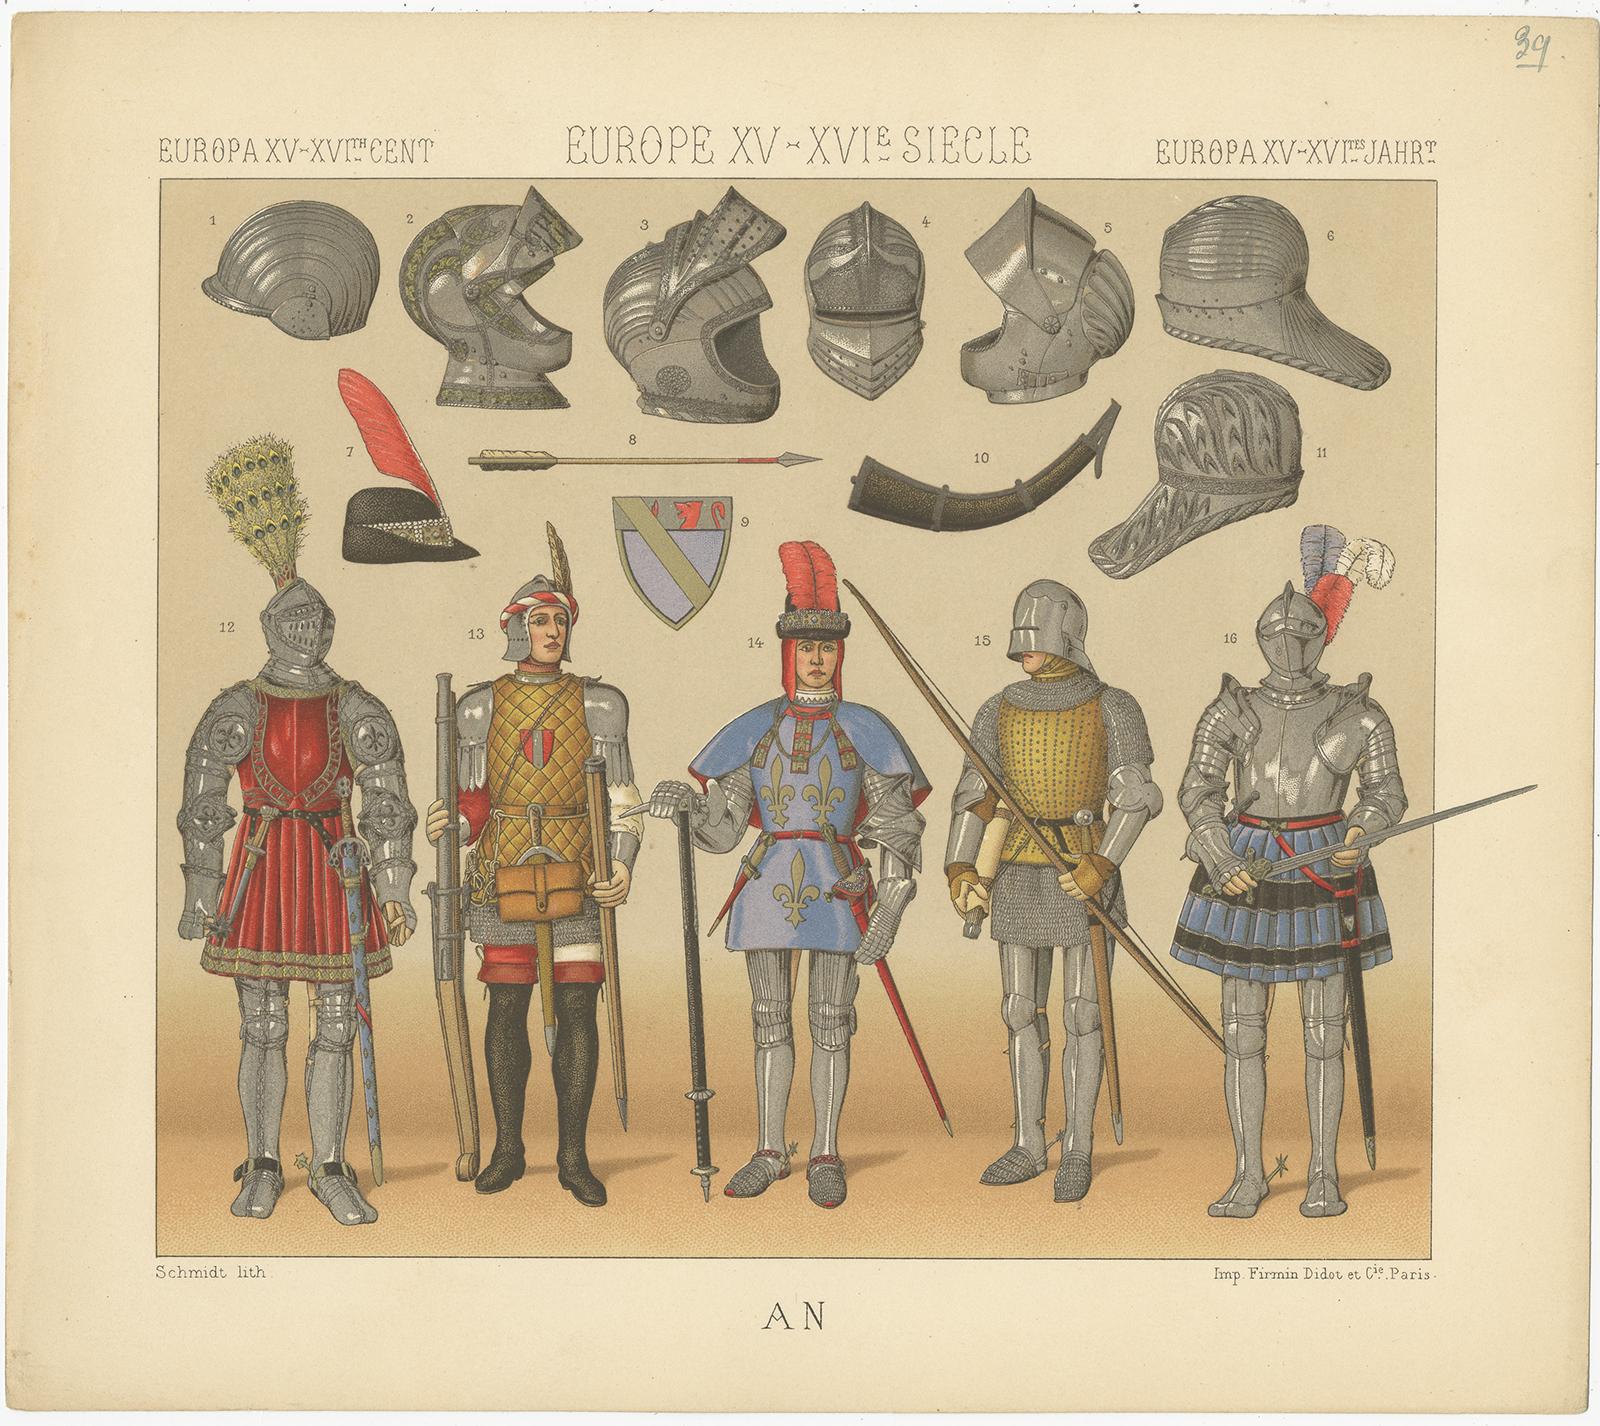 Antique print titled 'Europa XV, XVIth Cent - Europe XV, XVIe Siecle - Europa XV, XVItes Jahr'. Chromolithograph of European 15th-16th century armament. This print originates from 'Le Costume Historique' by M.A. Racinet. Published circa 1880.